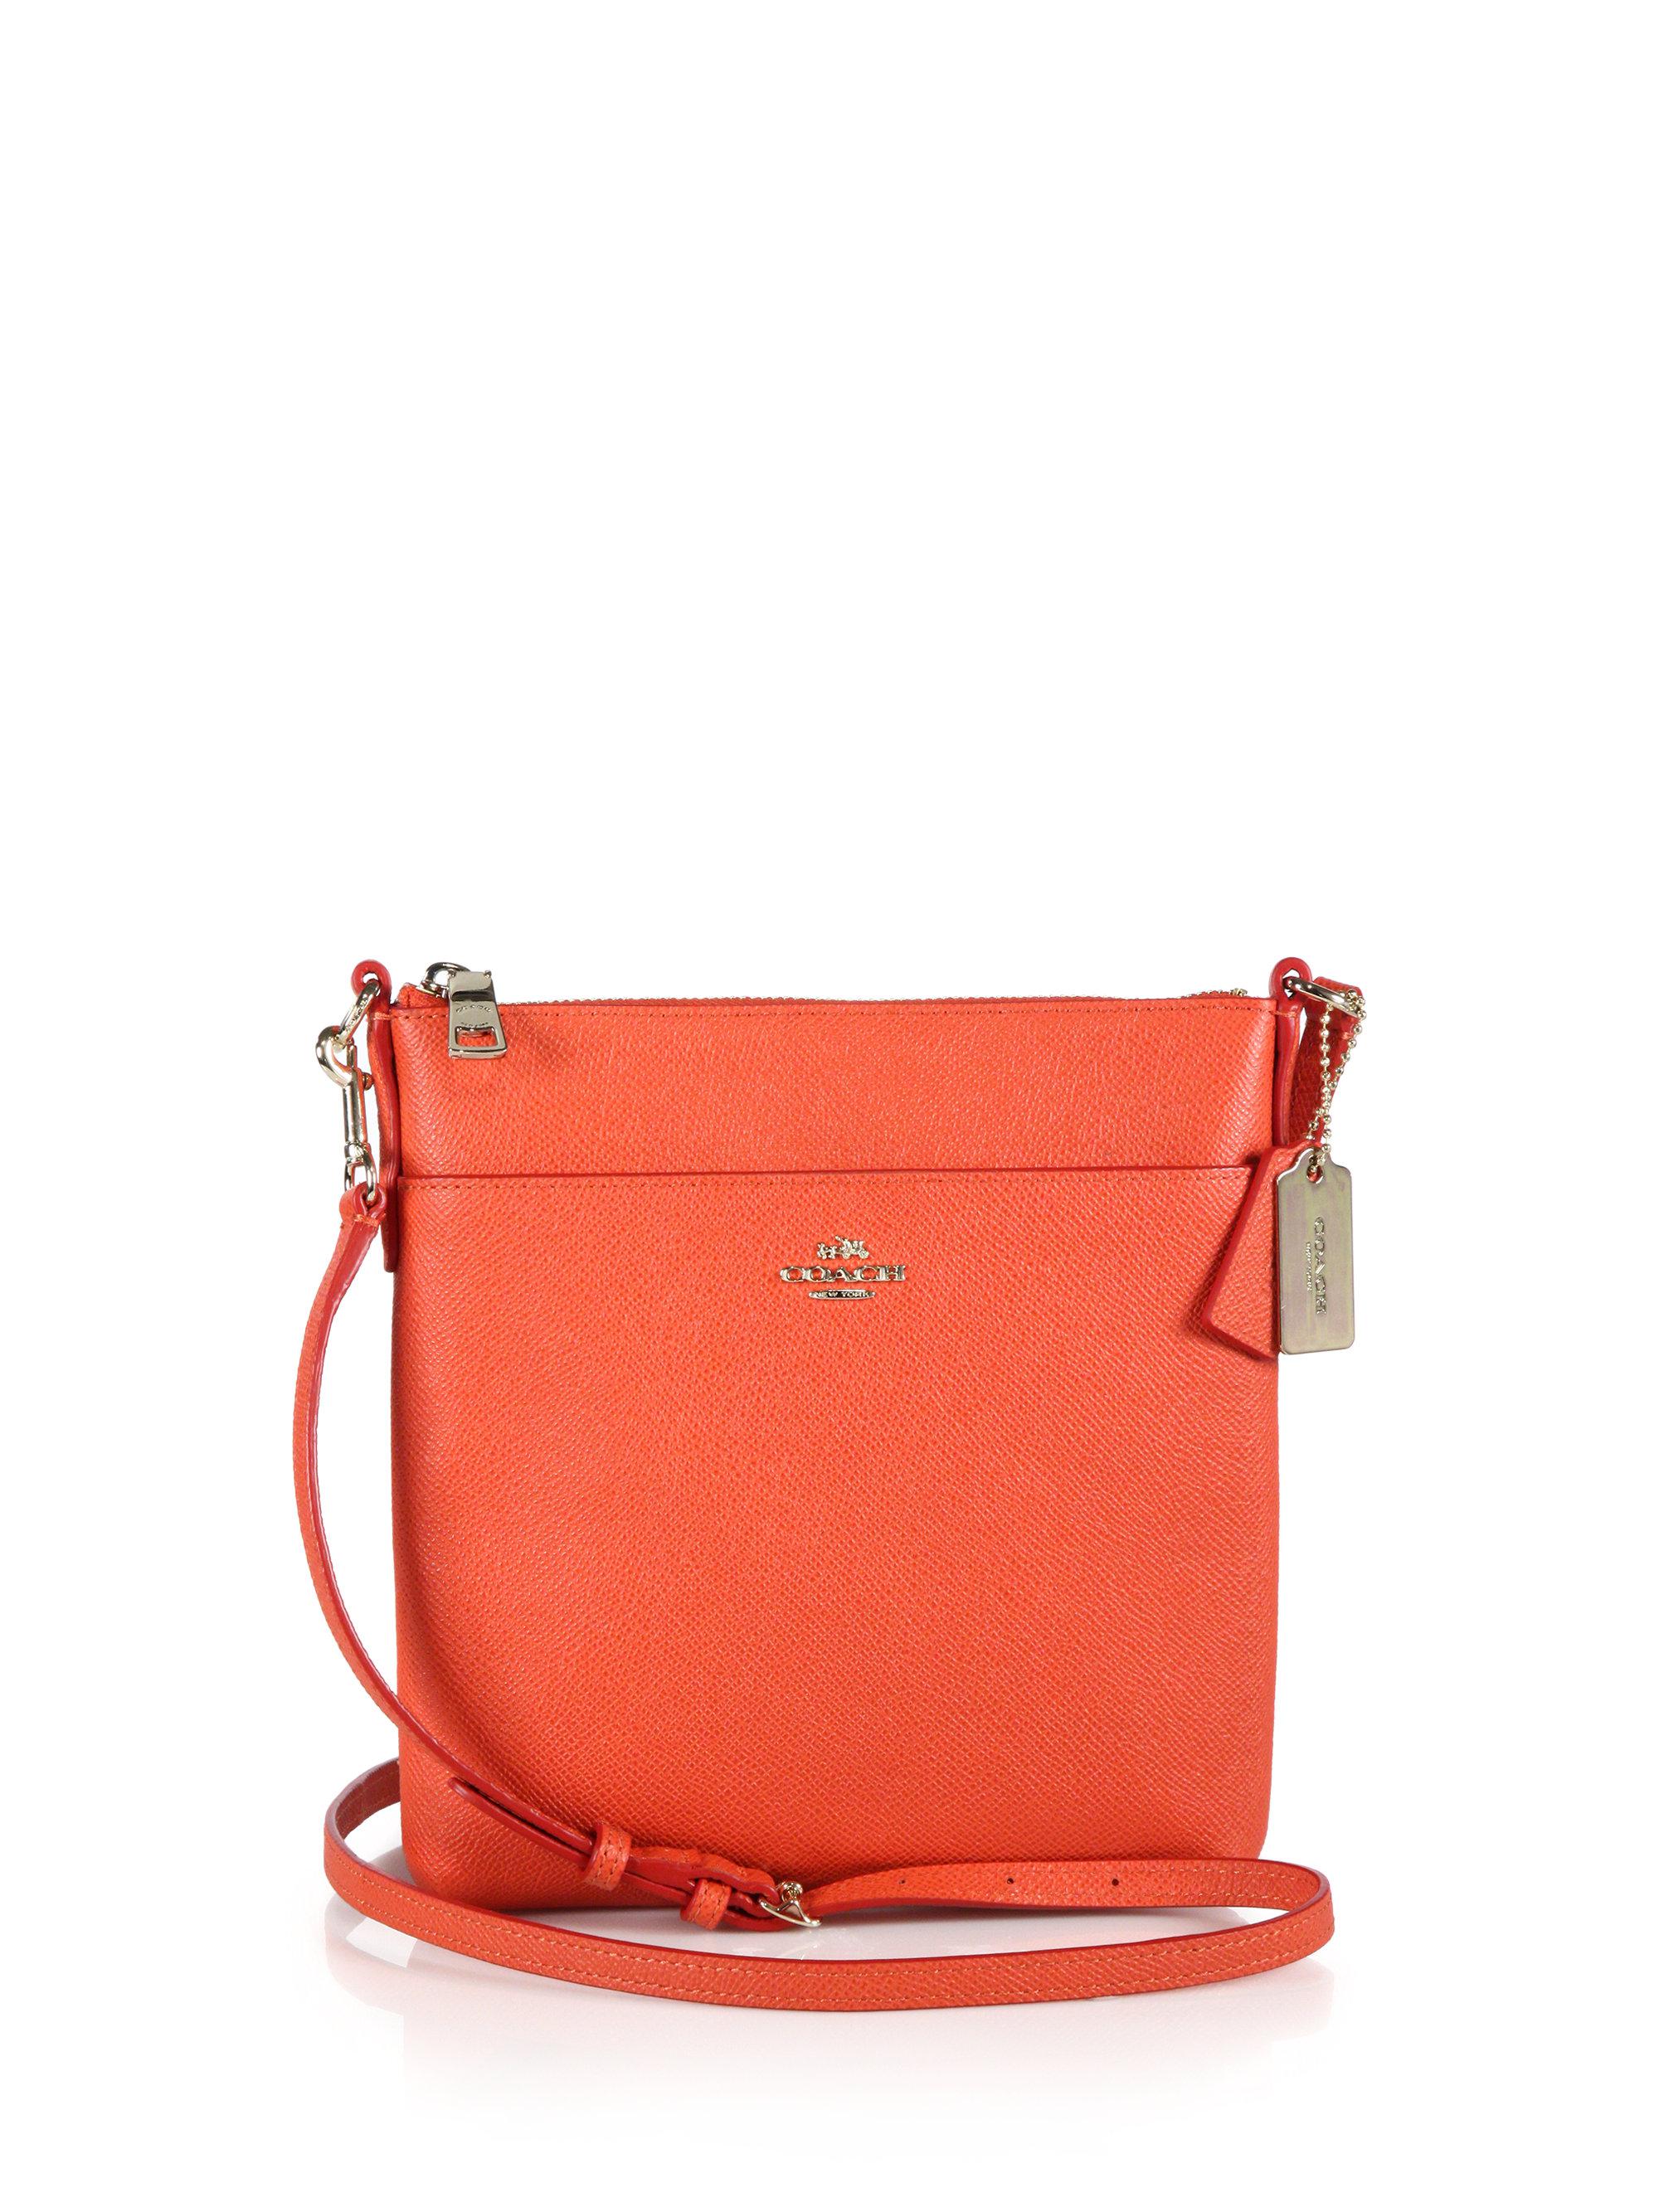 COACH Courier Textured Leather Crossbody Bag in Orange